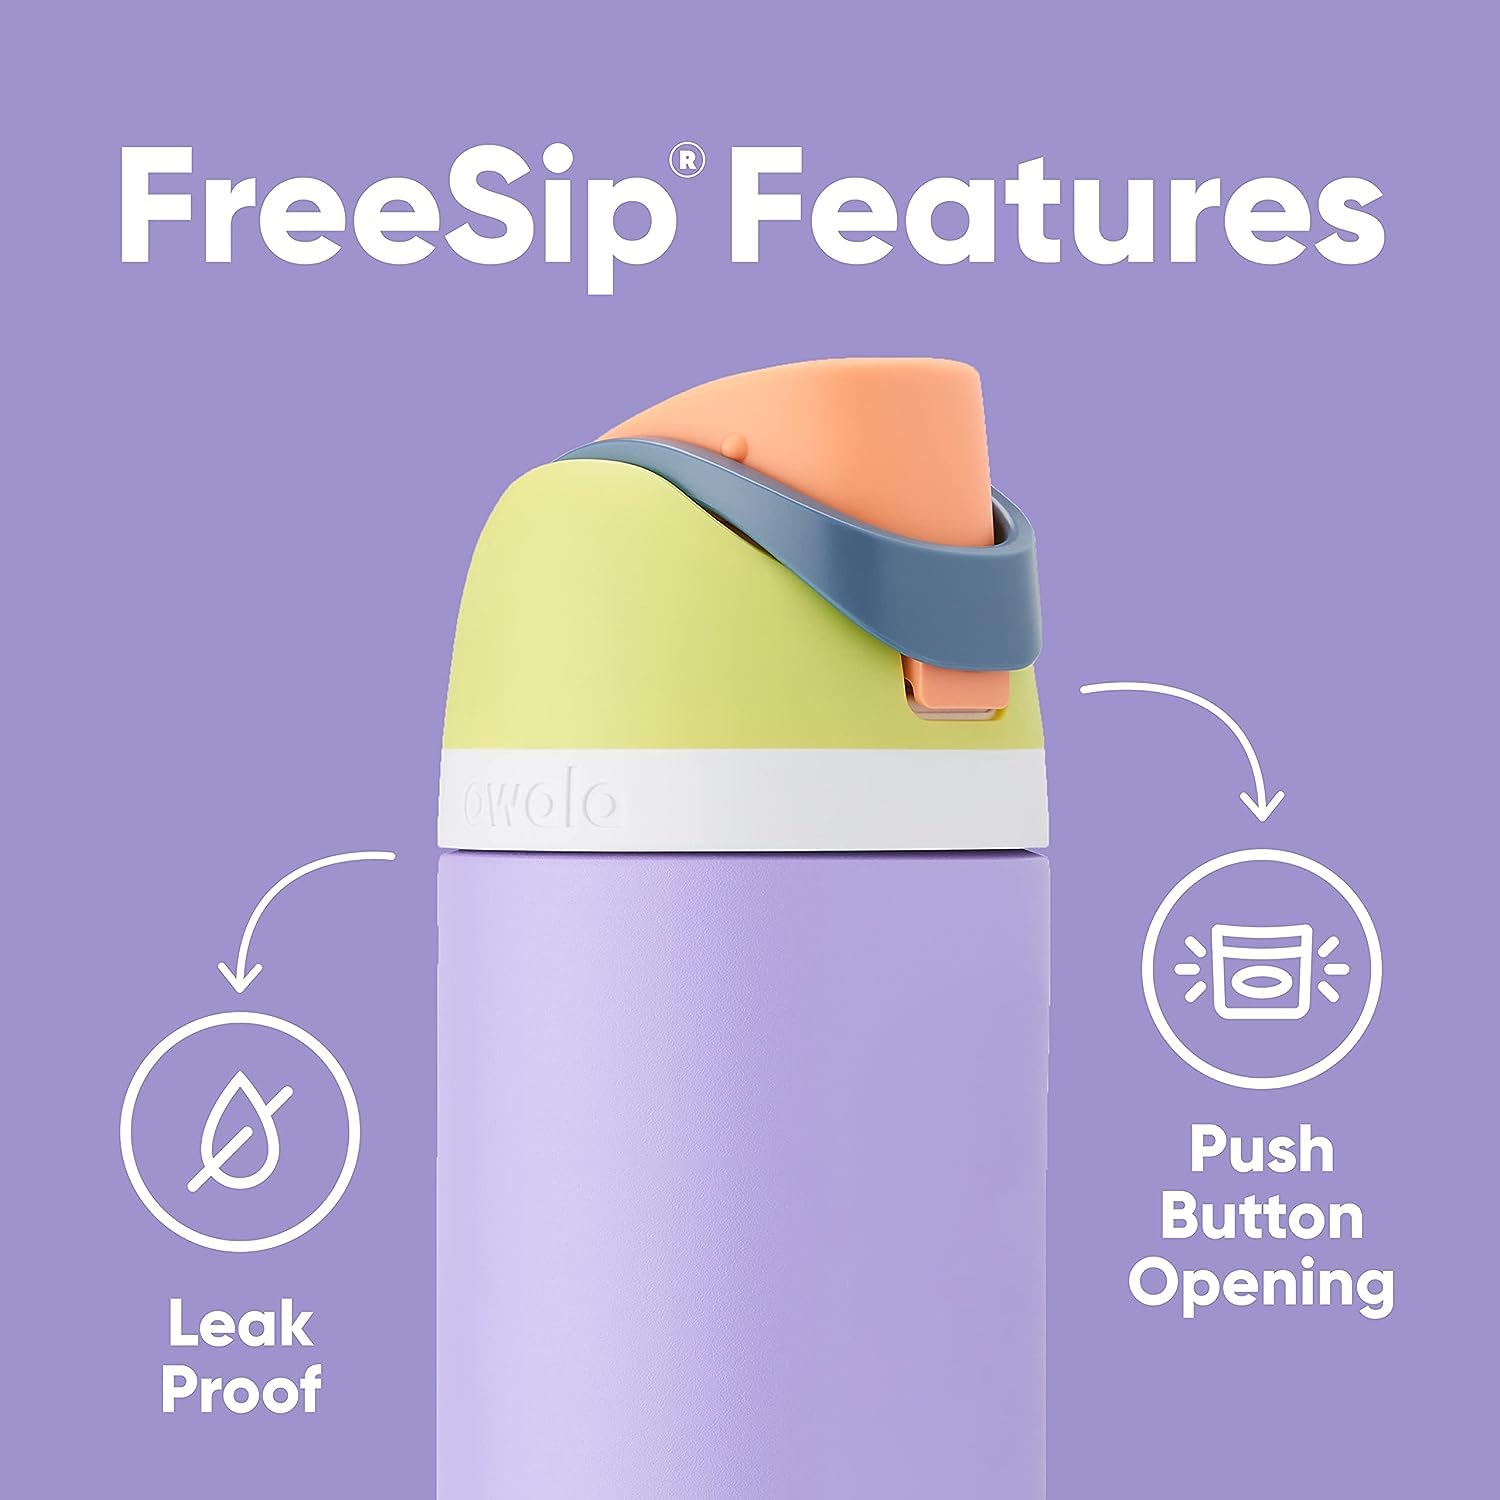 Owala FreeSip Insulated Stainless Steel Water Bottle with Straw for Sports and Travel, BPA-Free, 24-oz, Light Green/Lilac (Retro Boardwalk)